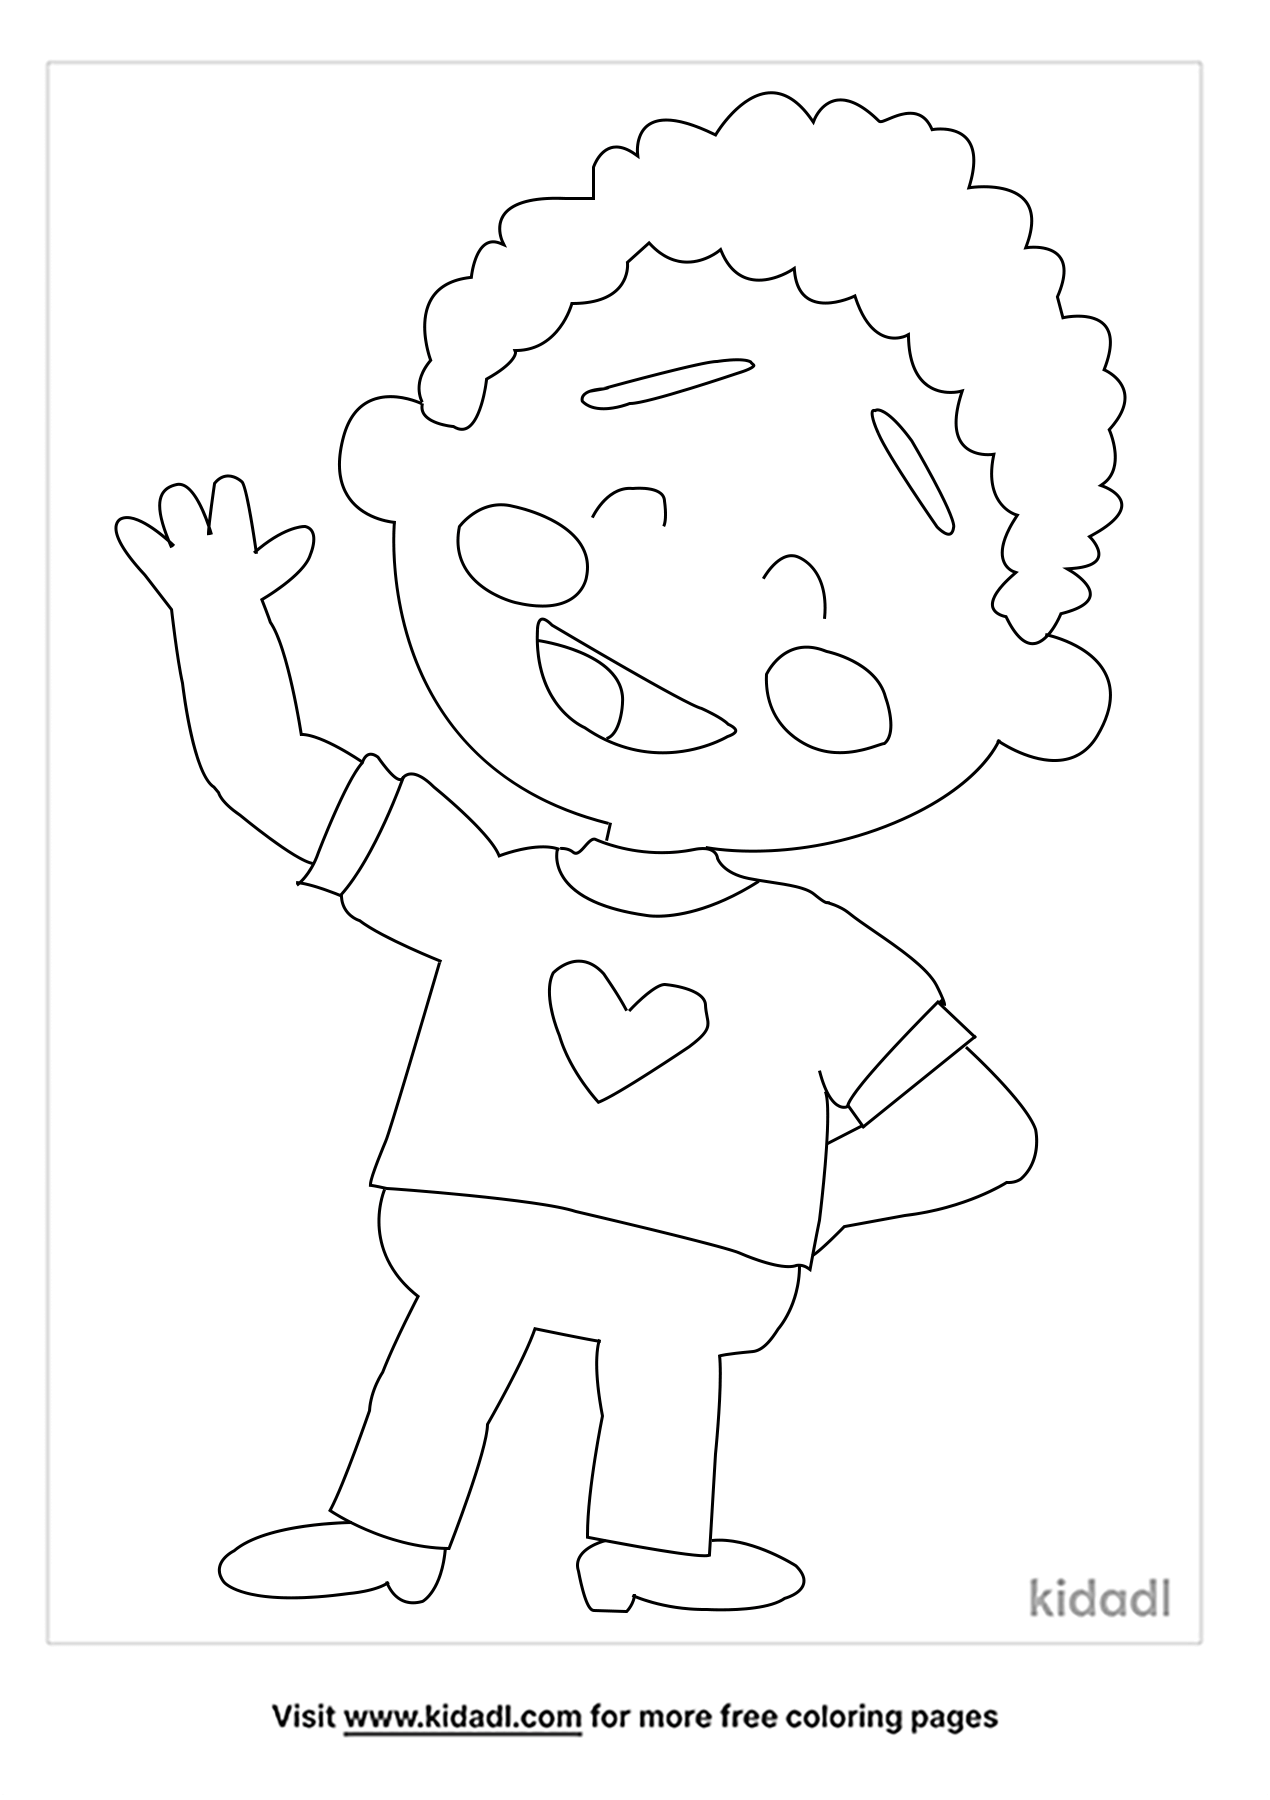 Black Boy Coloring Pages   Coloring Home